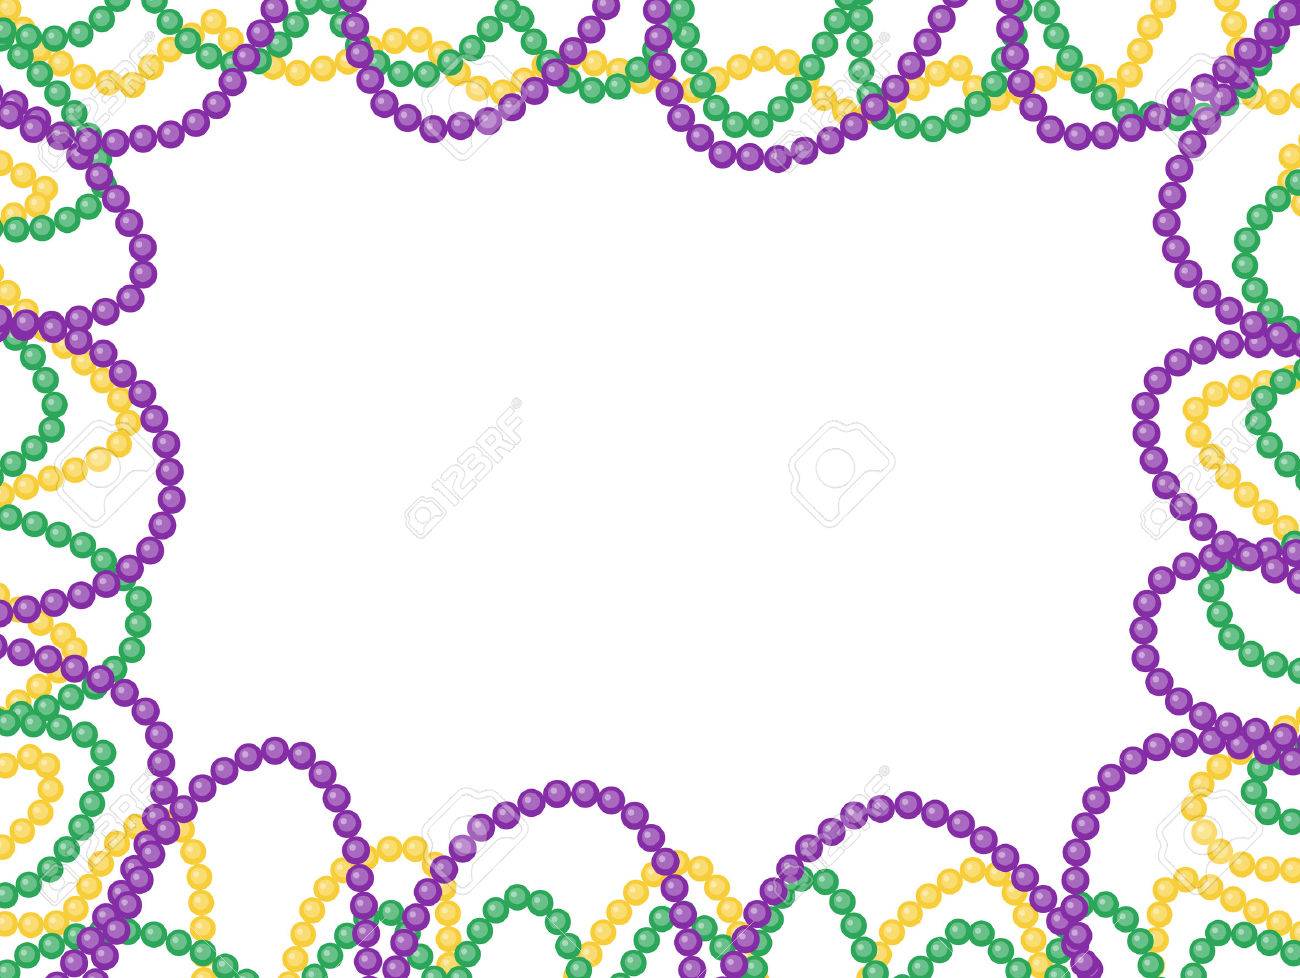 Mardi Gras Beads Frame Isolated On White Background Vector